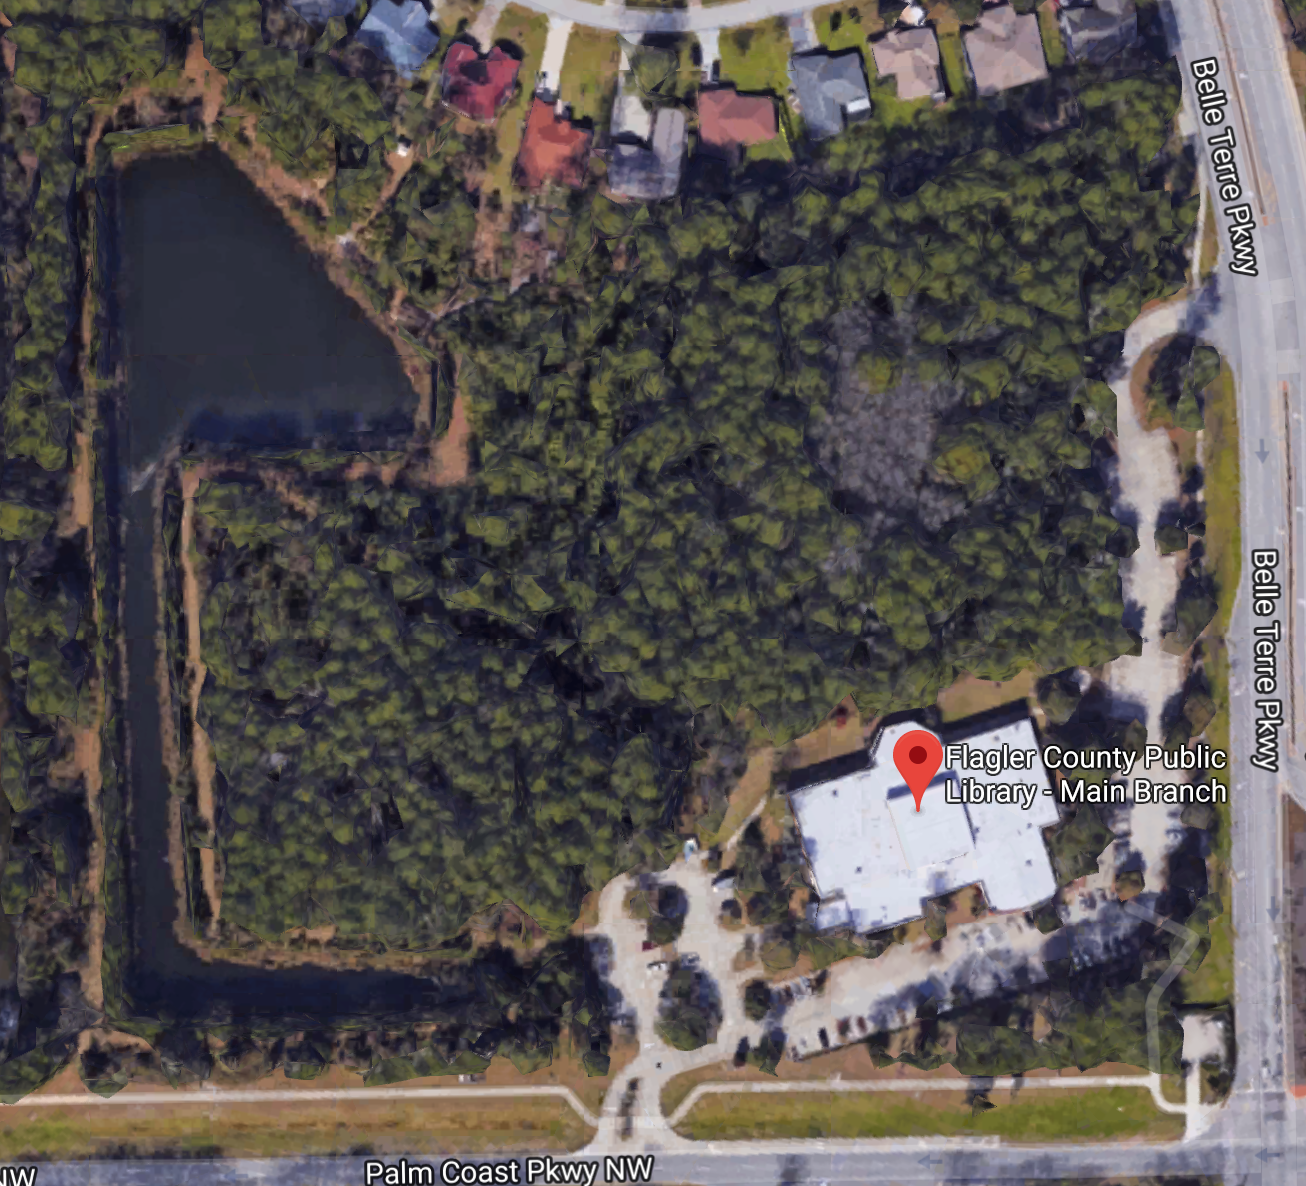 The Flagler County Public Library is a 19-acre property located at 2500 Palm Coast Parkway NW. Image courtesy of Google Maps